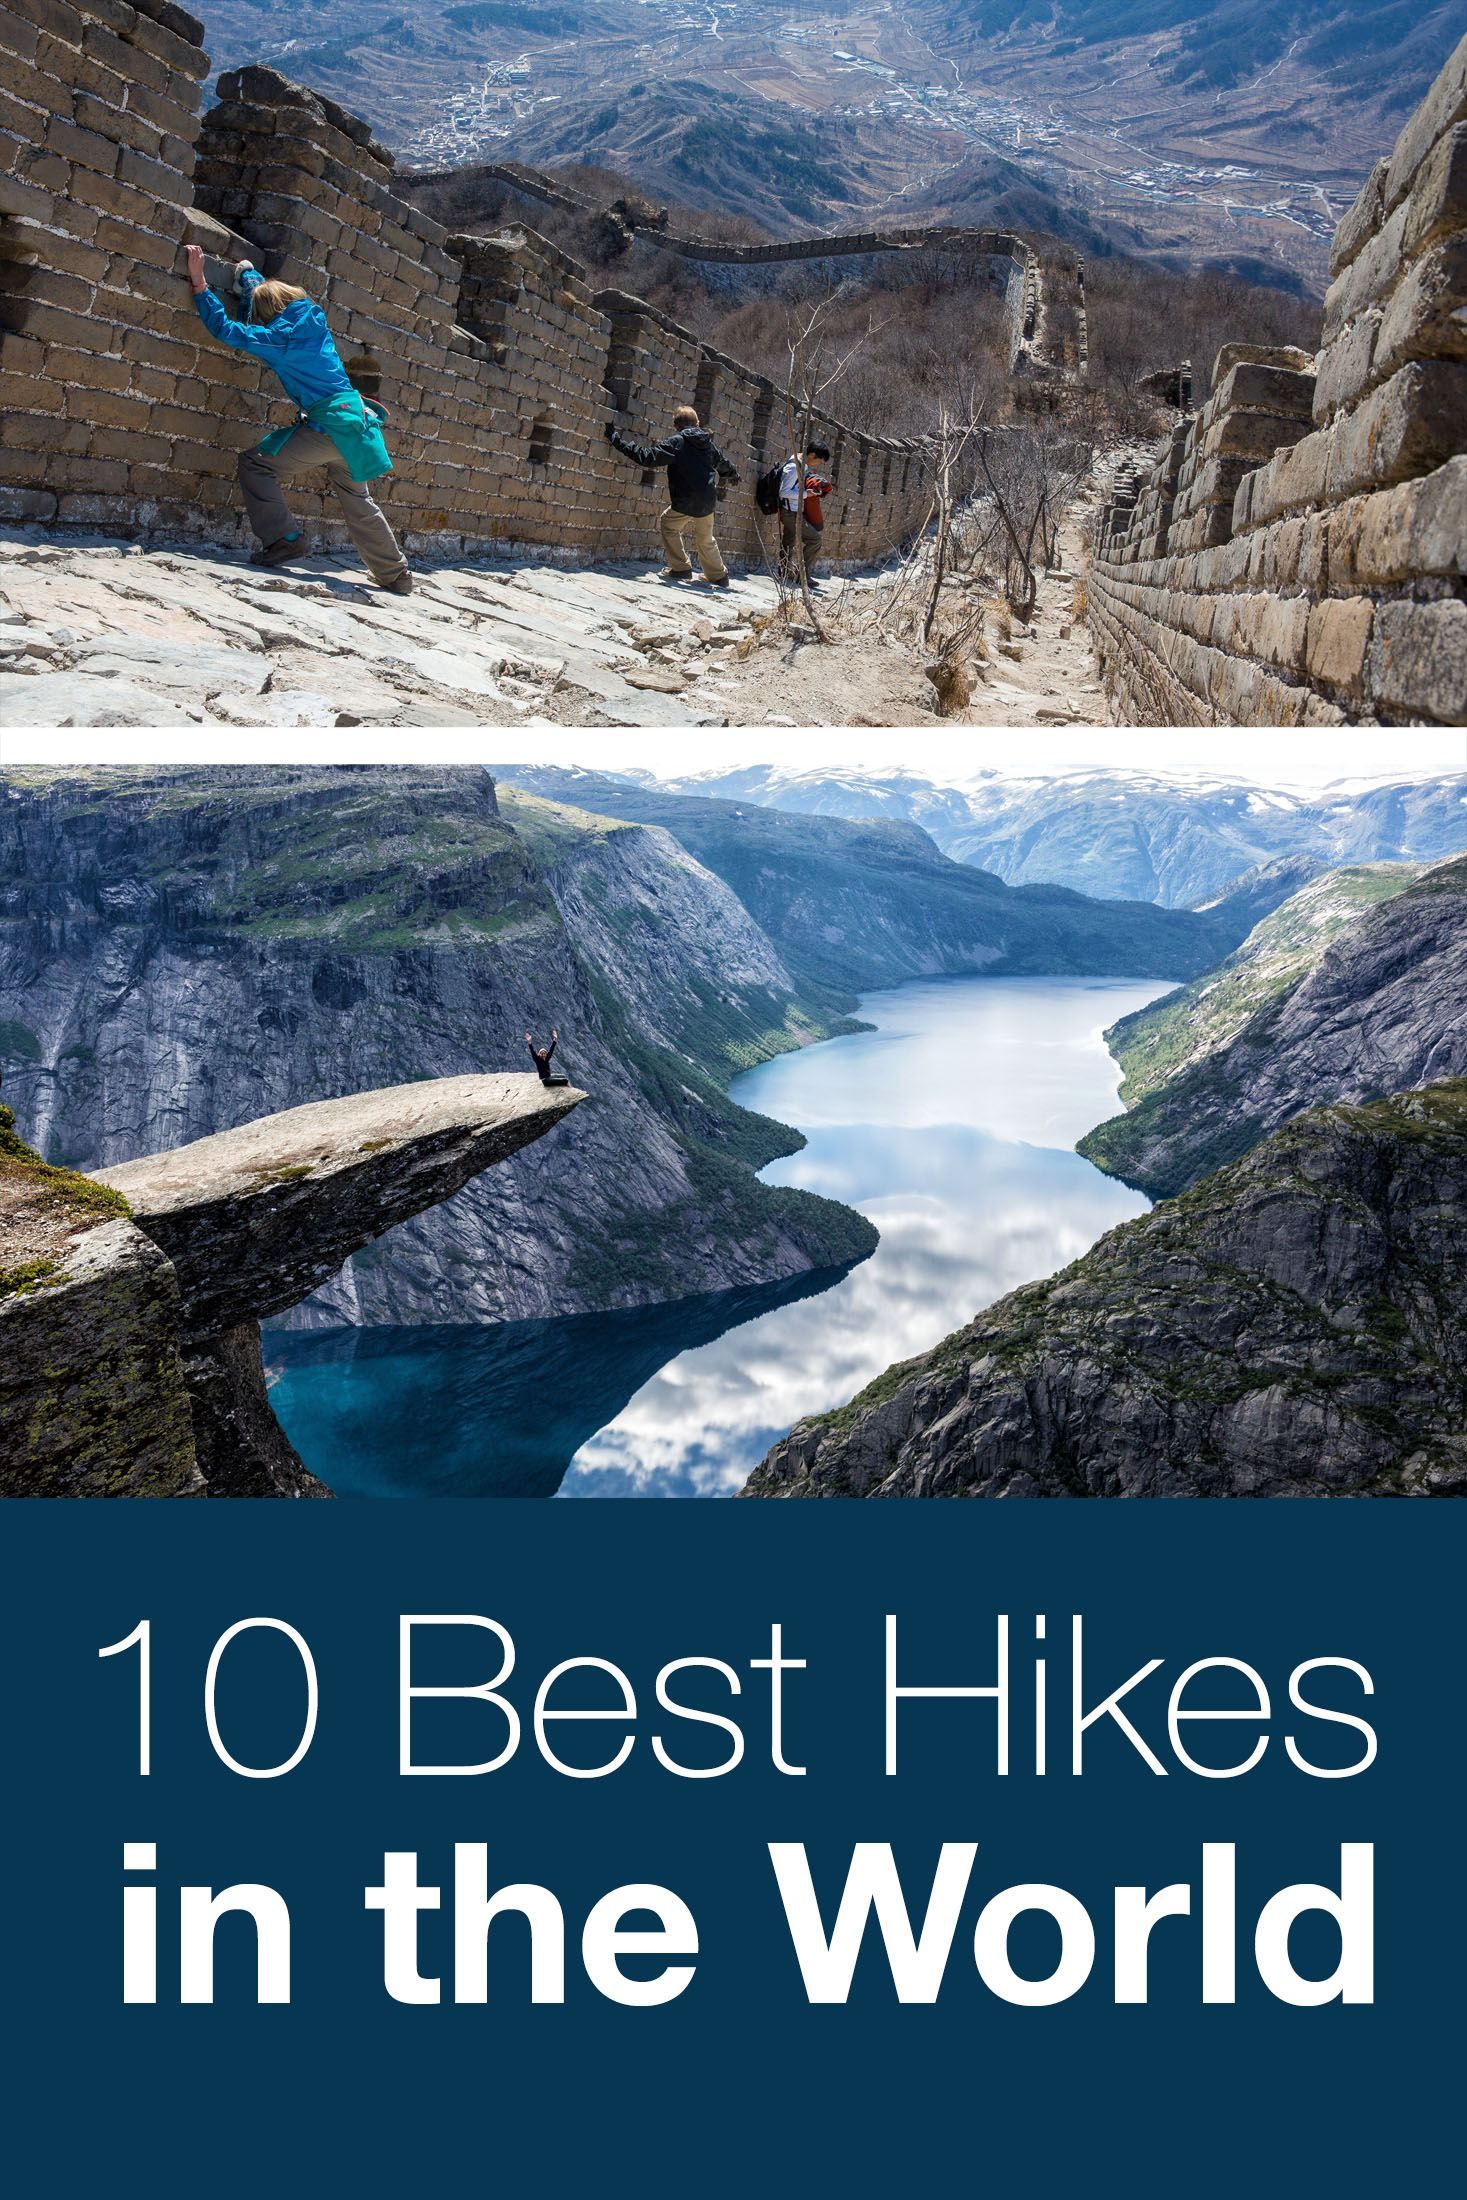 10 Best Hikes in the World